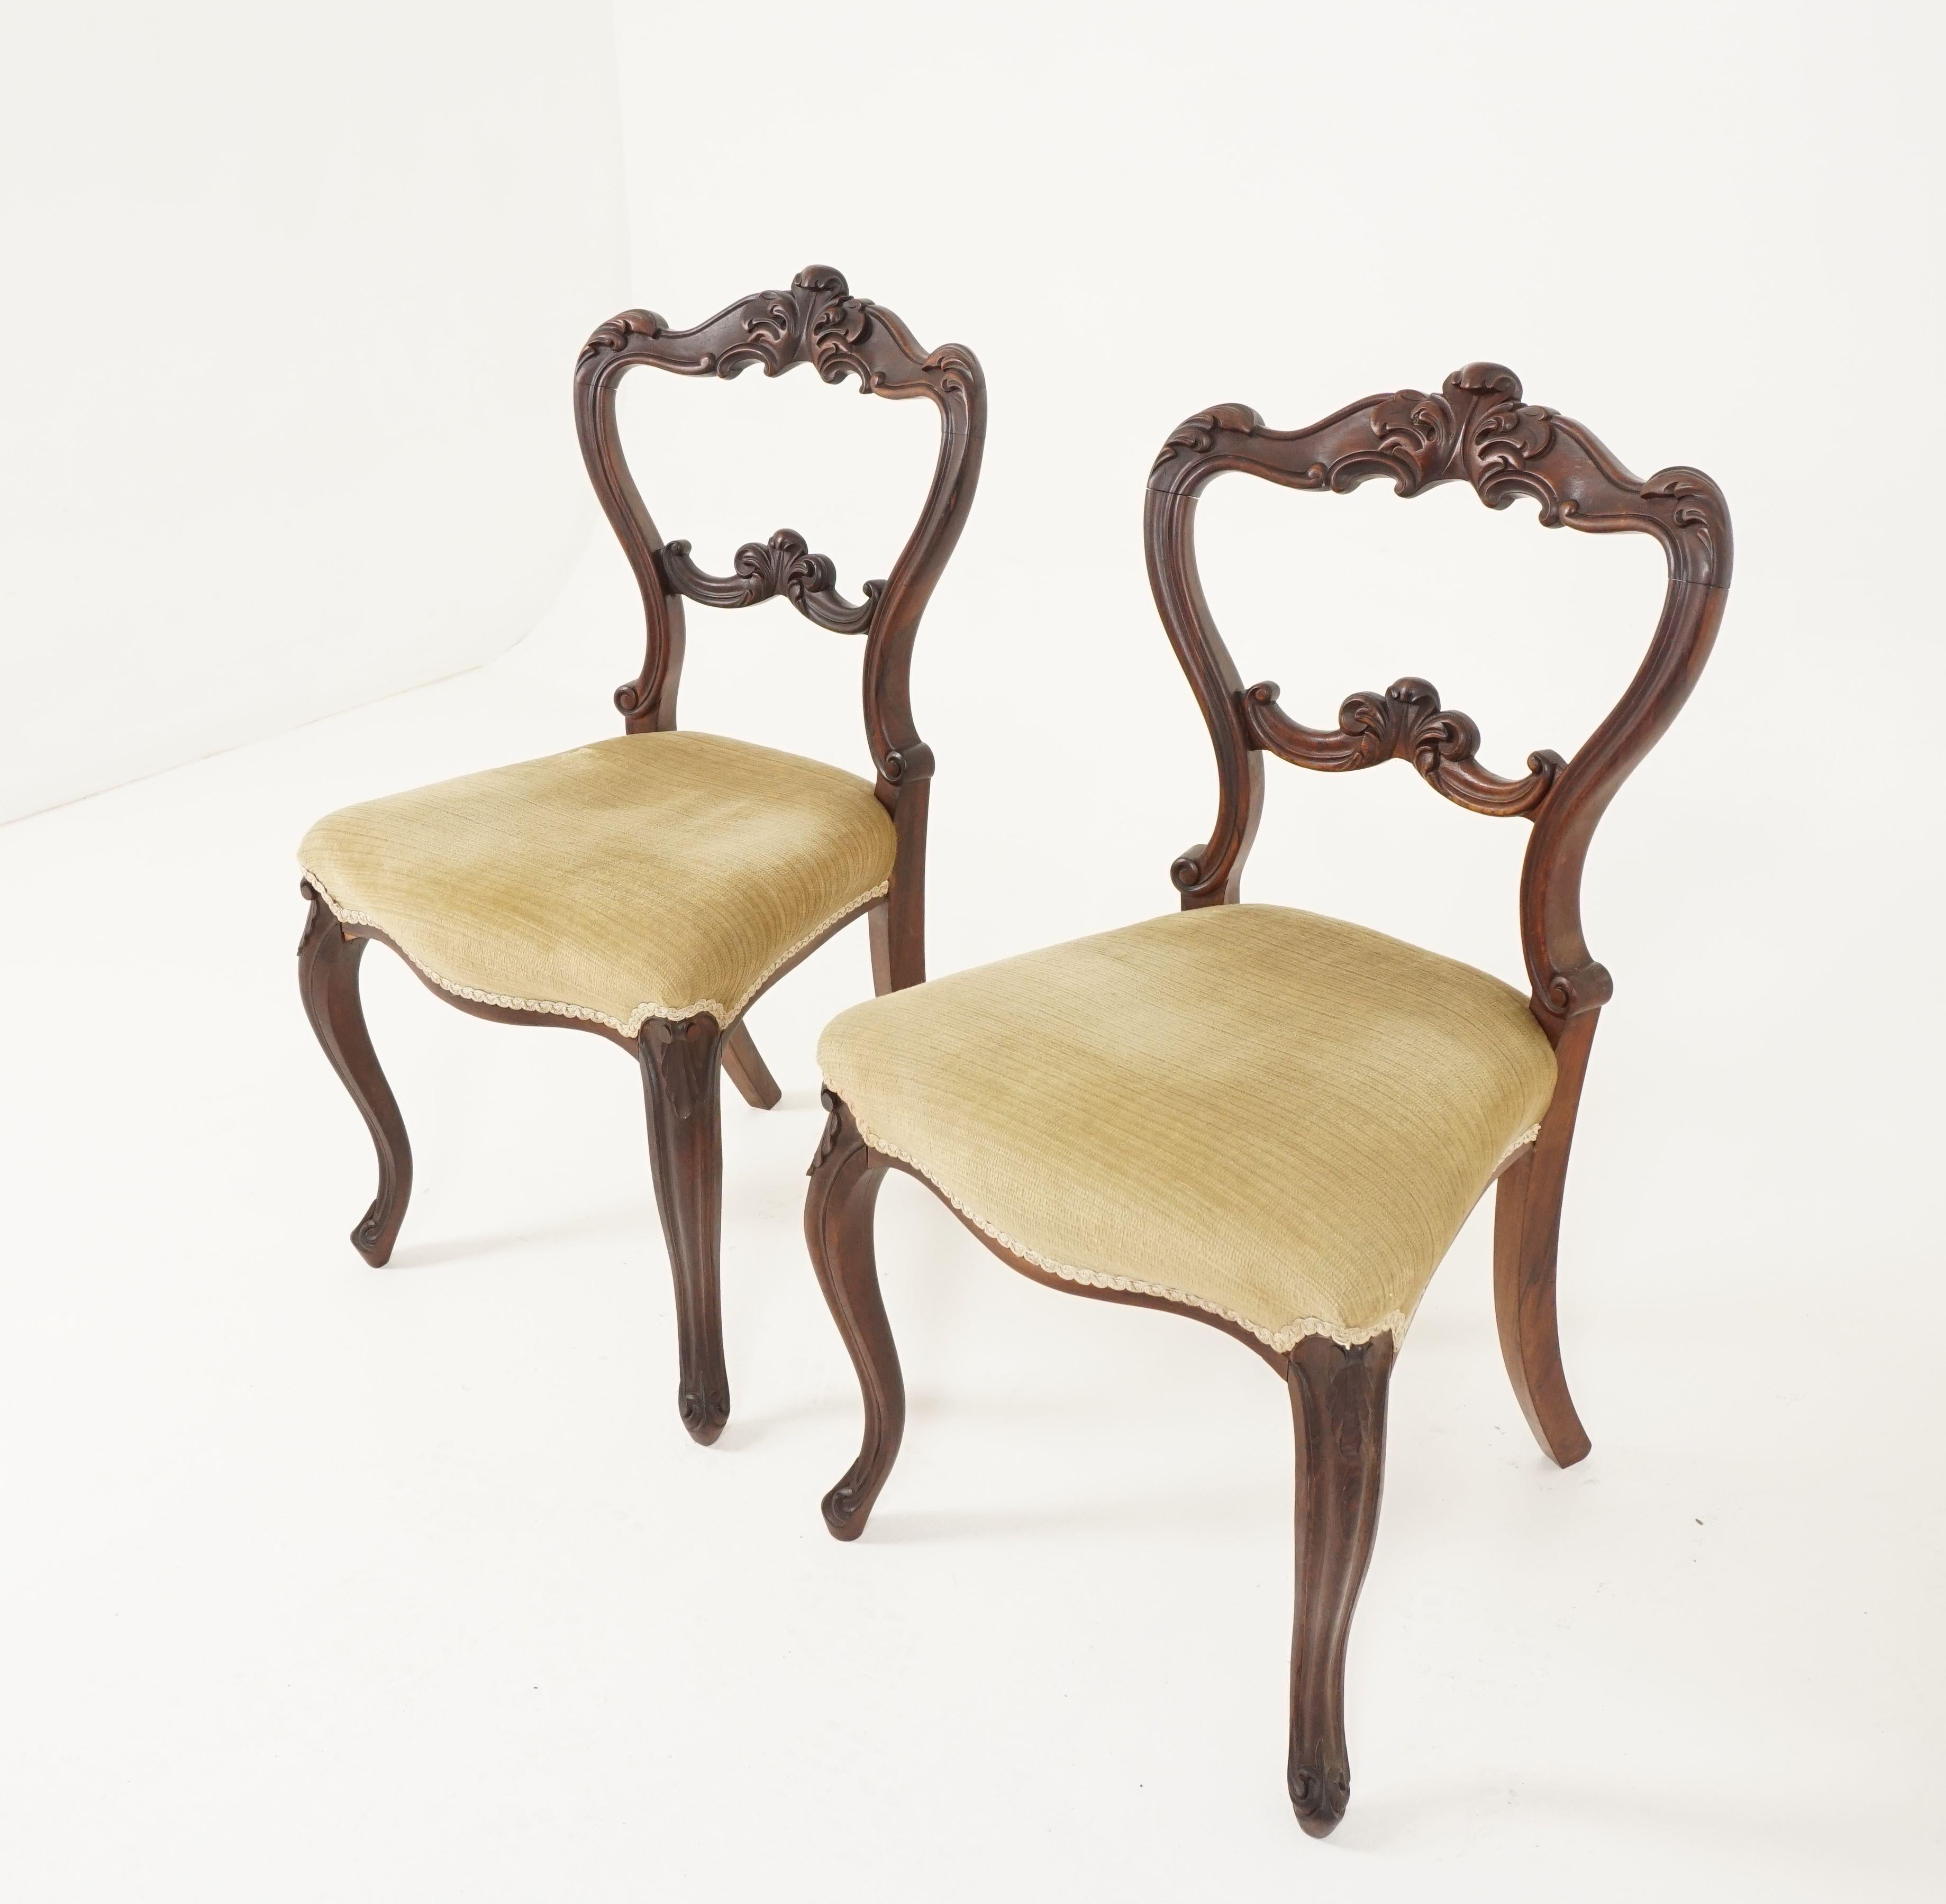 Pair of antique carved walnut occasional chairs, Scotland, 1870, B2462

Scotland, 1870
Solid walnut
Original finish
Carved top rail
Shaped supports to the side
Lower carved rail
Serpentine upholstered seat
Standing on cabriole legs to the back
Nice